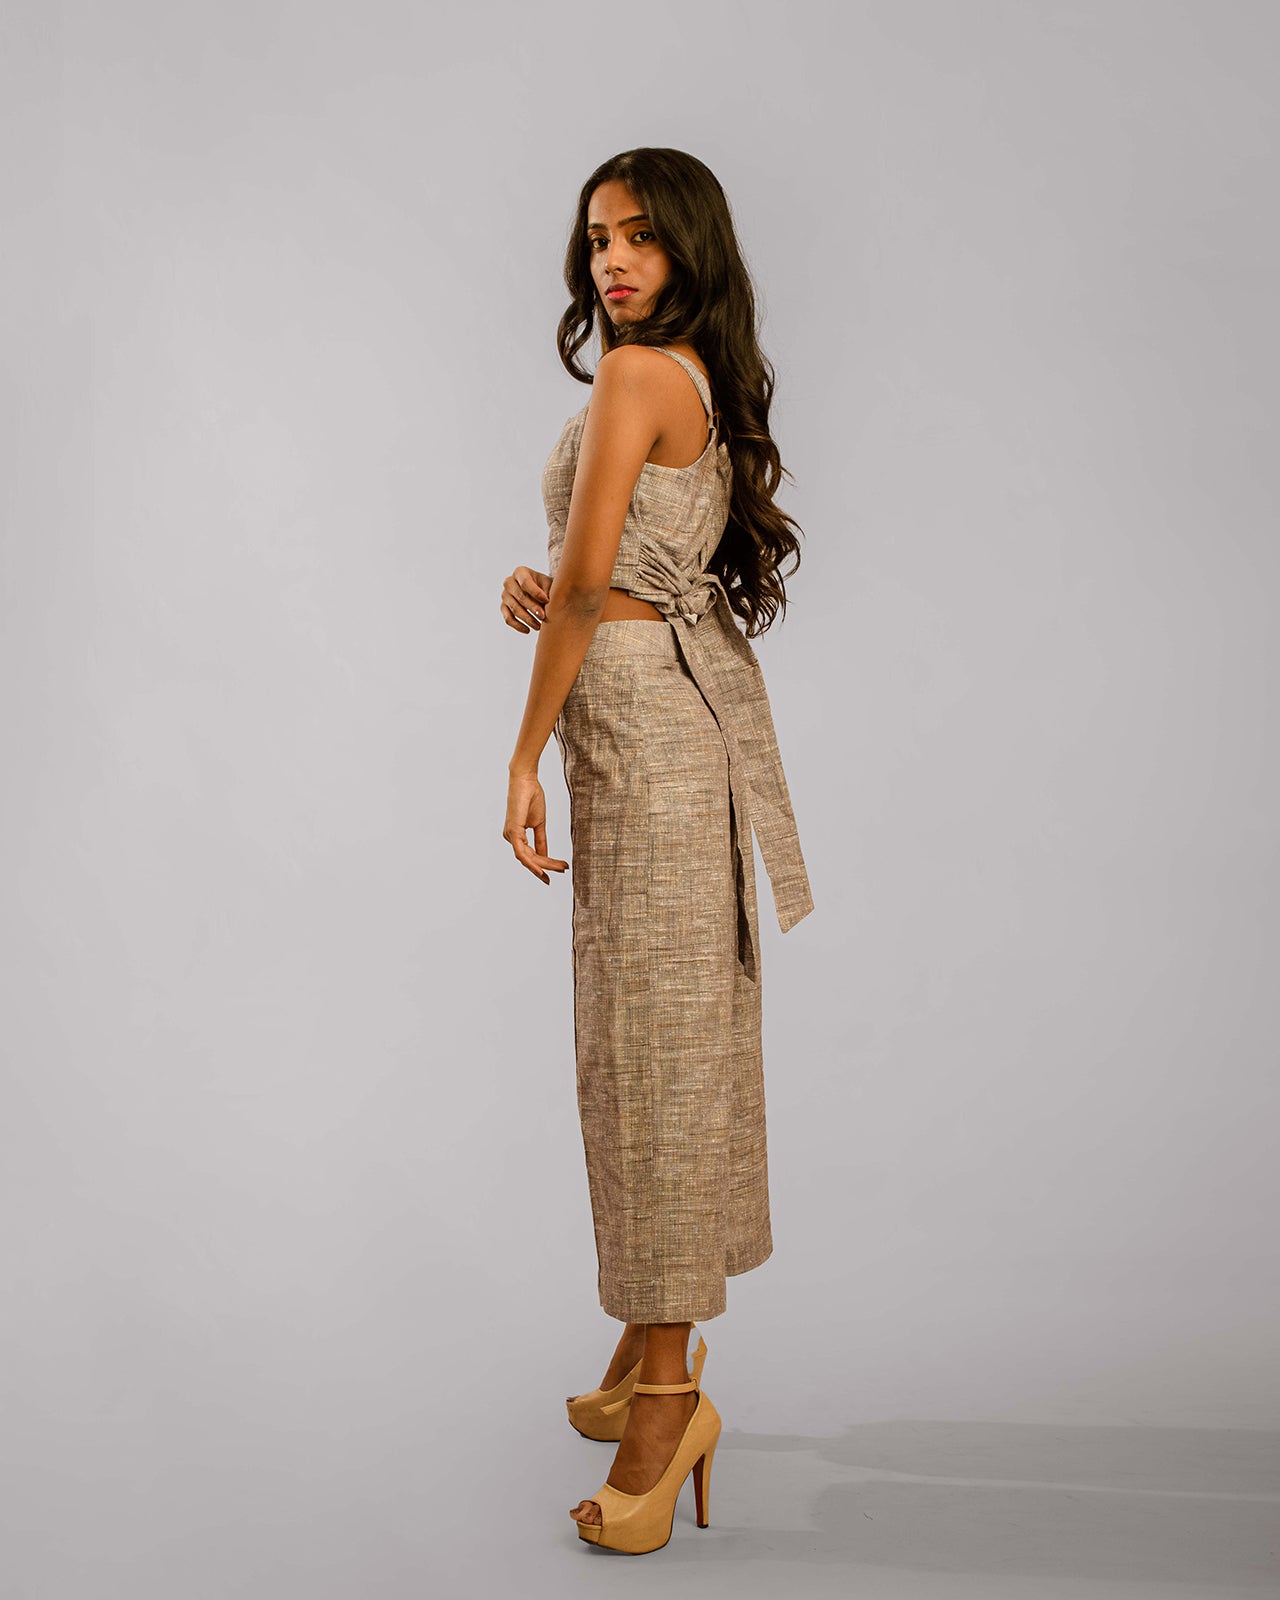 Grey Wide Leg Ankle Length Pant Crop Top With Sash Co-Ords